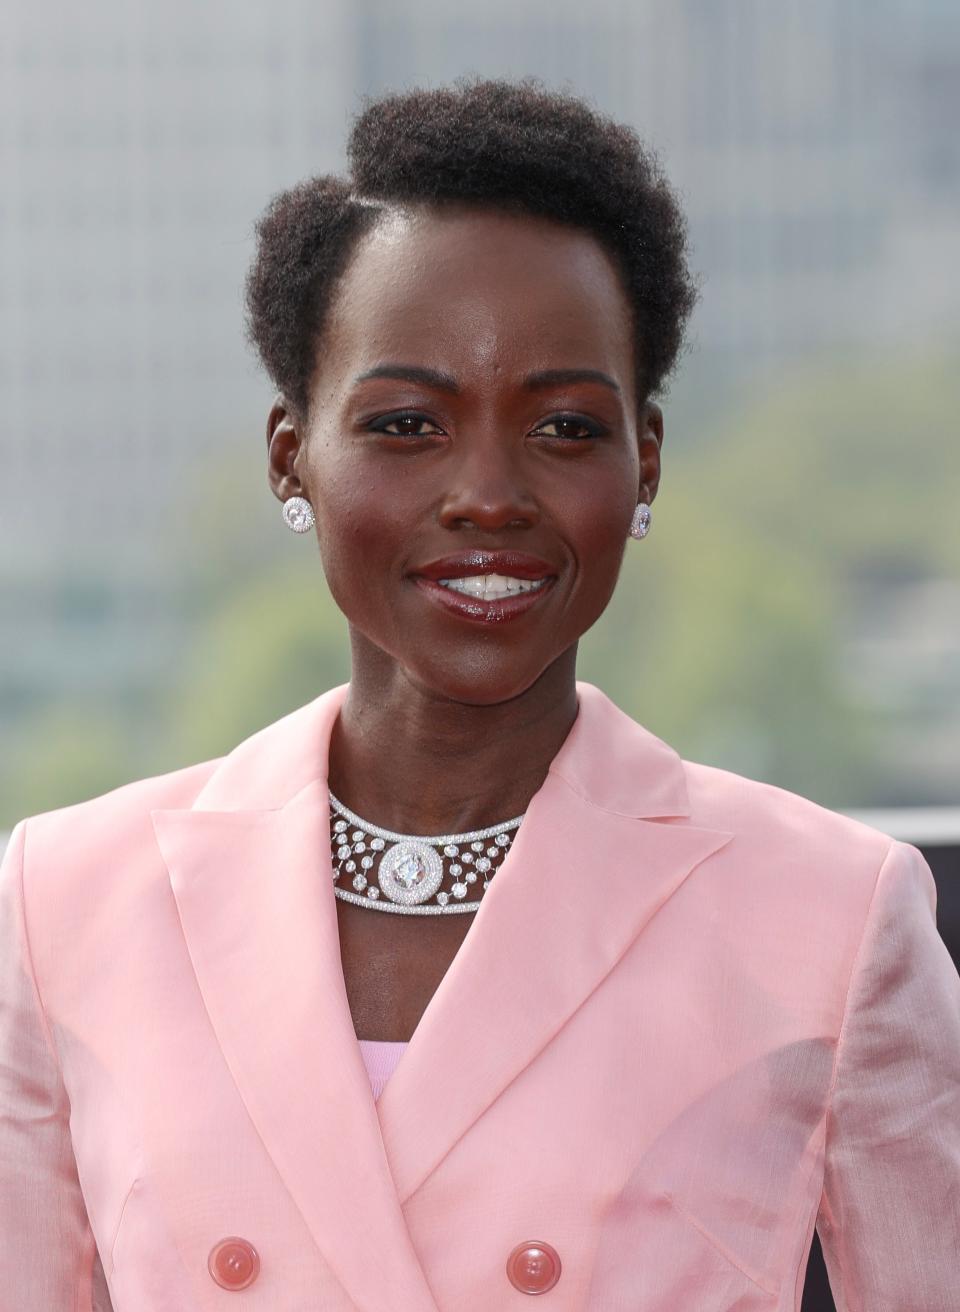 Lupita Nyong'o wearing a chic tailored suit jacket and a statement necklace, photographed at an outdoor event